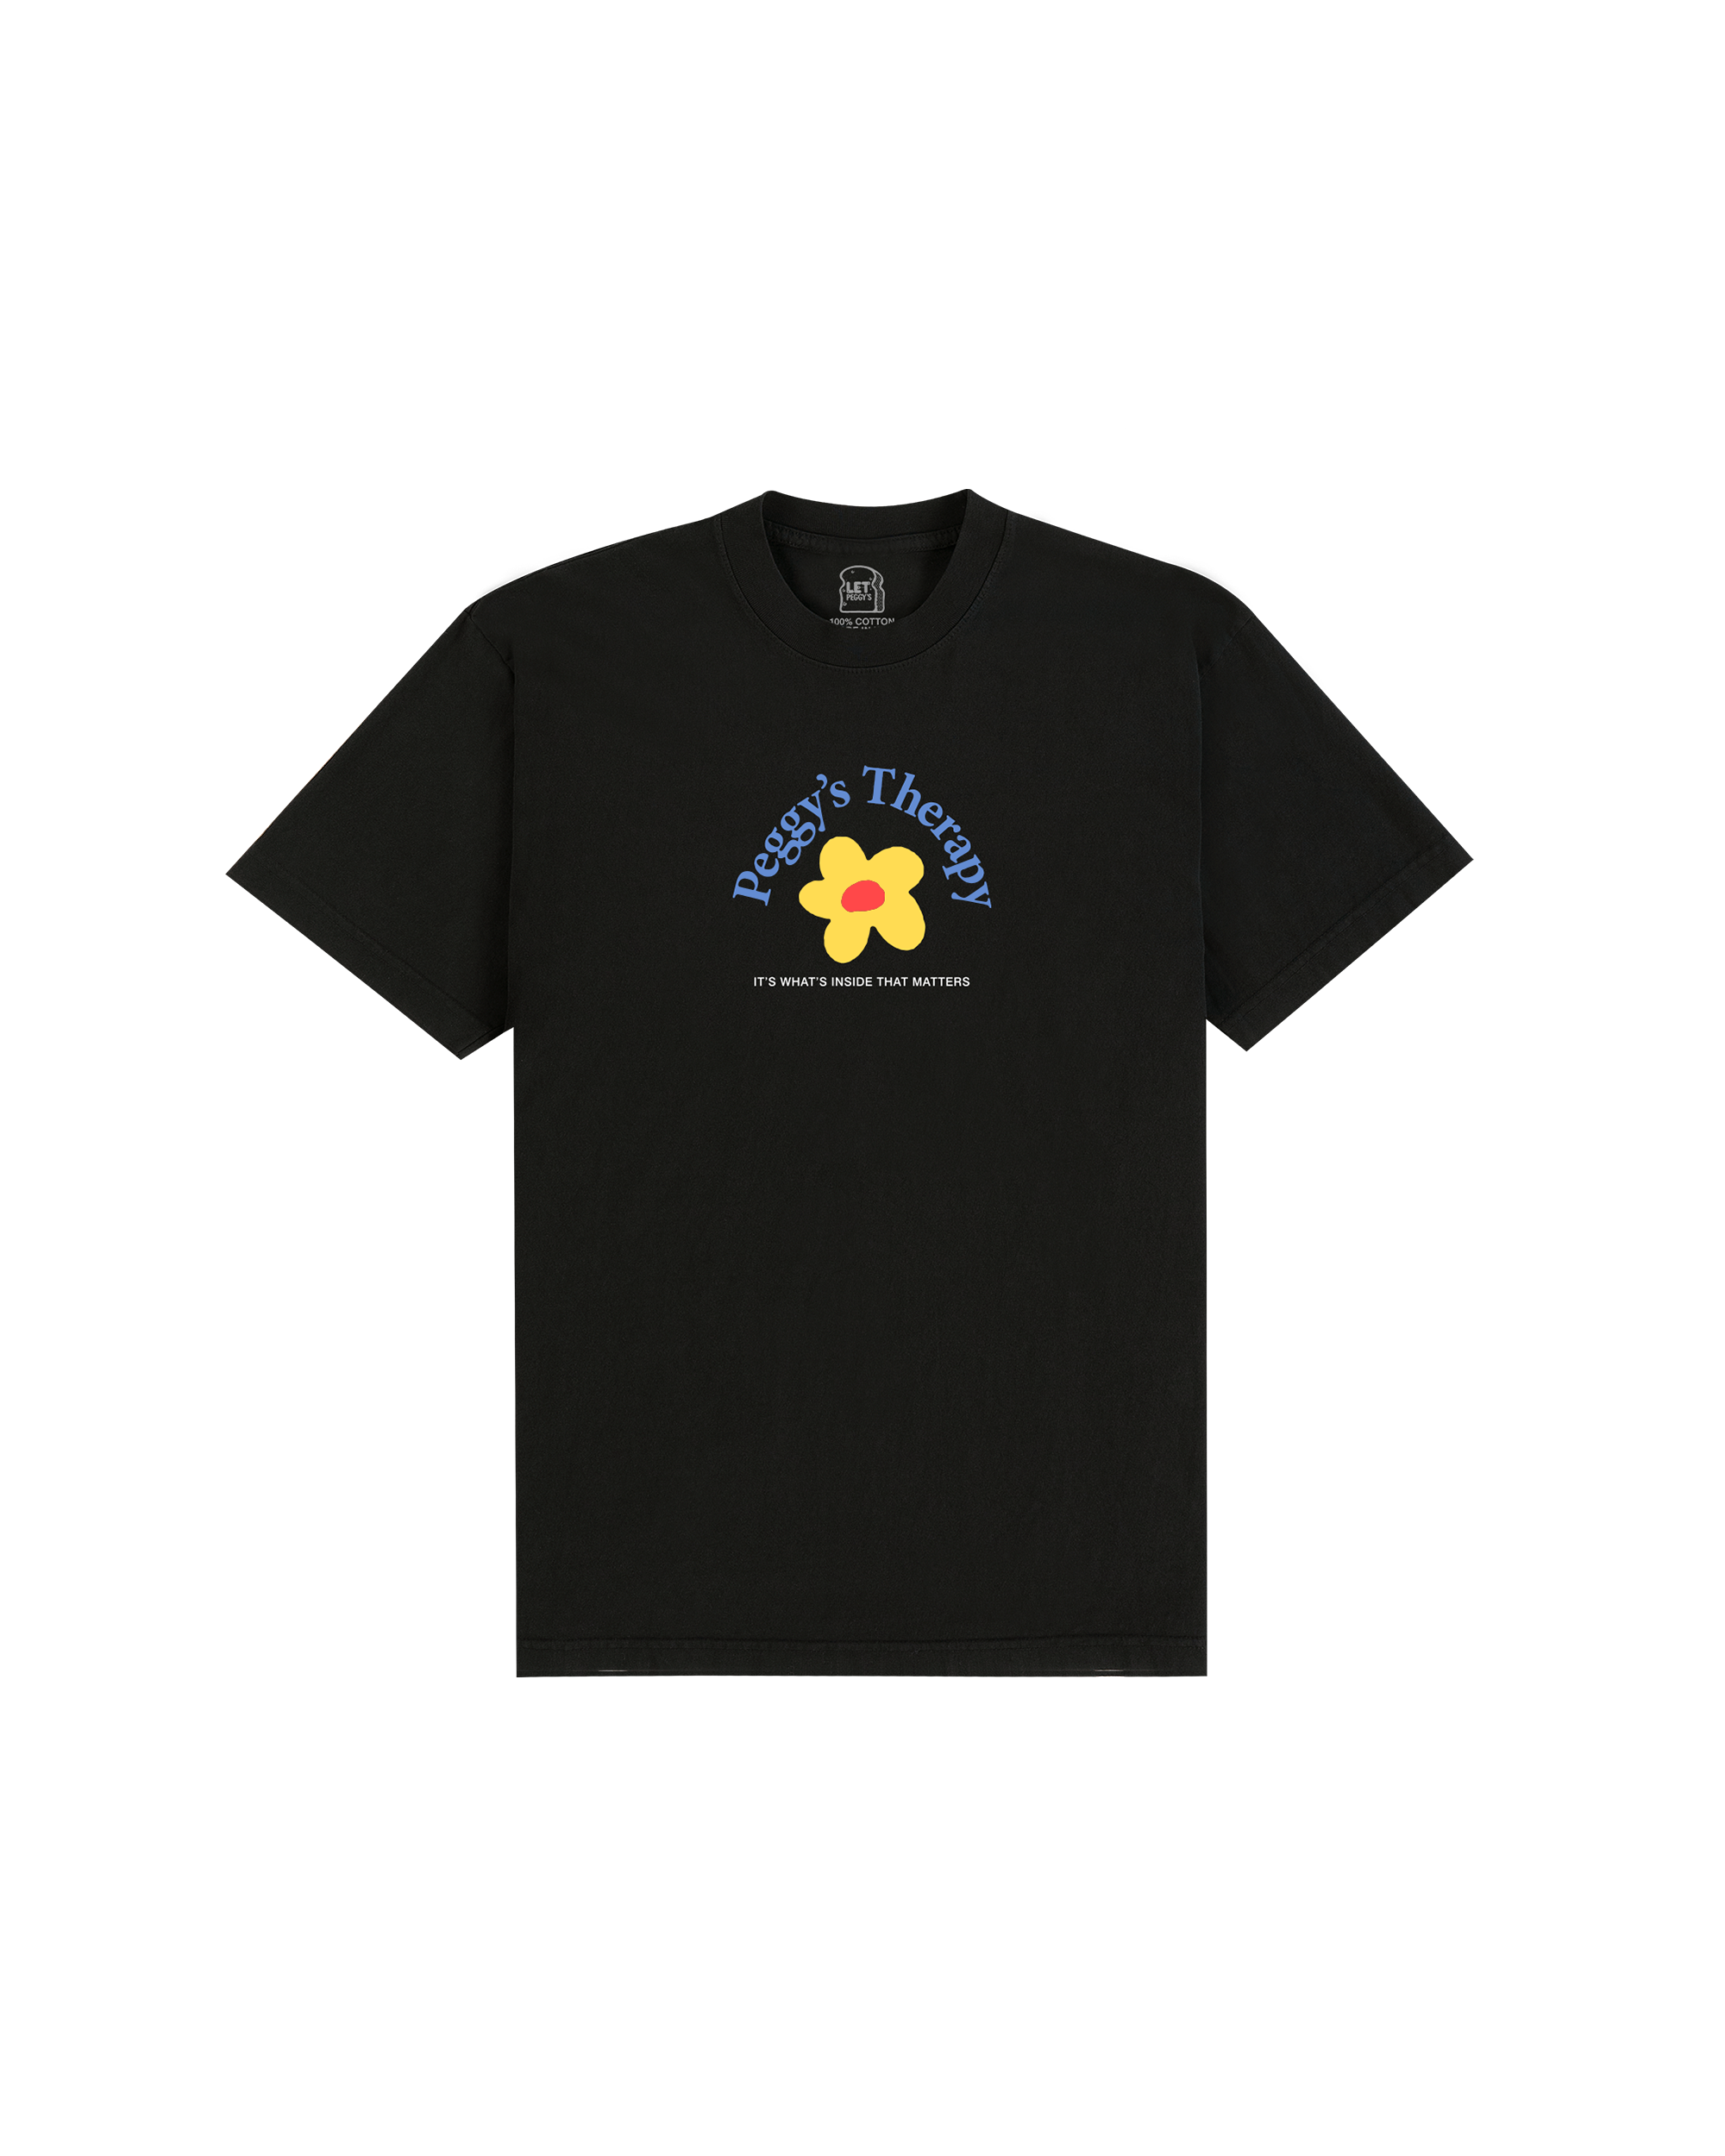 Peggys Therapy T-Shirt - Black